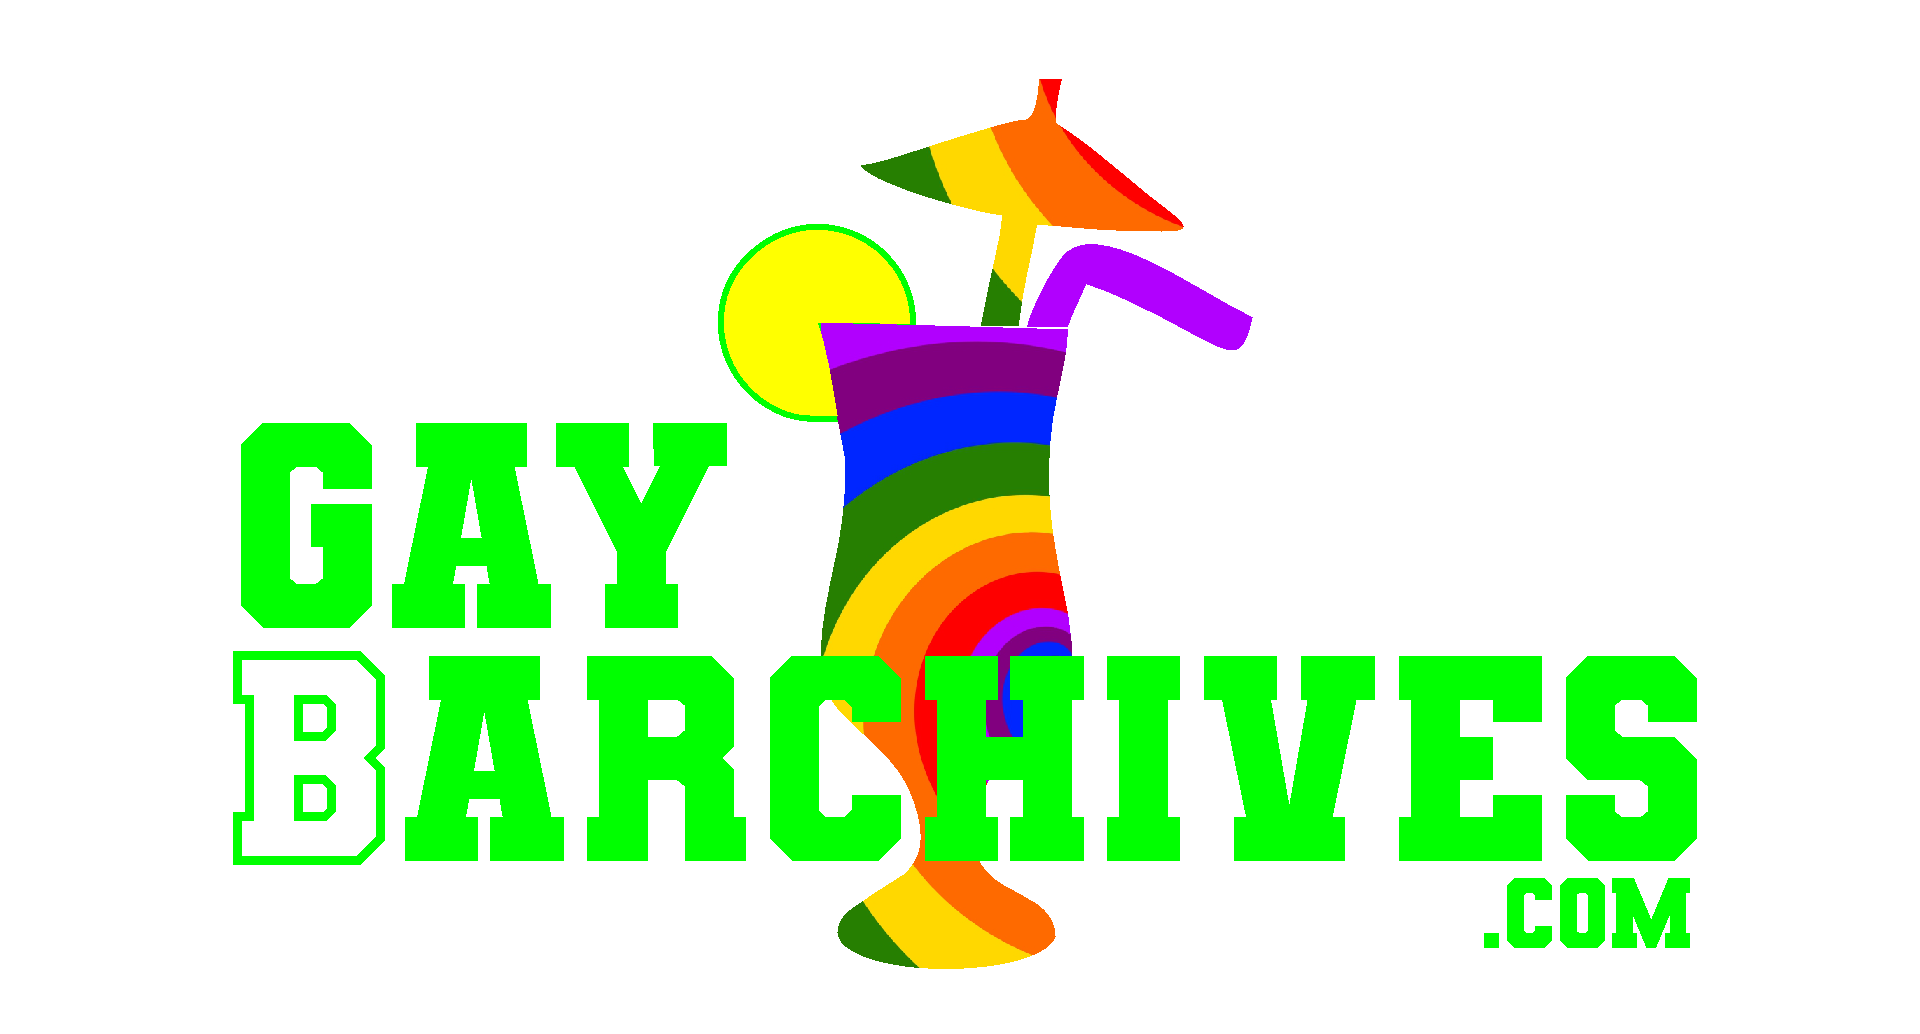 Building the World's Largest Collection of the logos and stories of gay bars from the past. This colossal undertaking is documented at GayBarchives.com